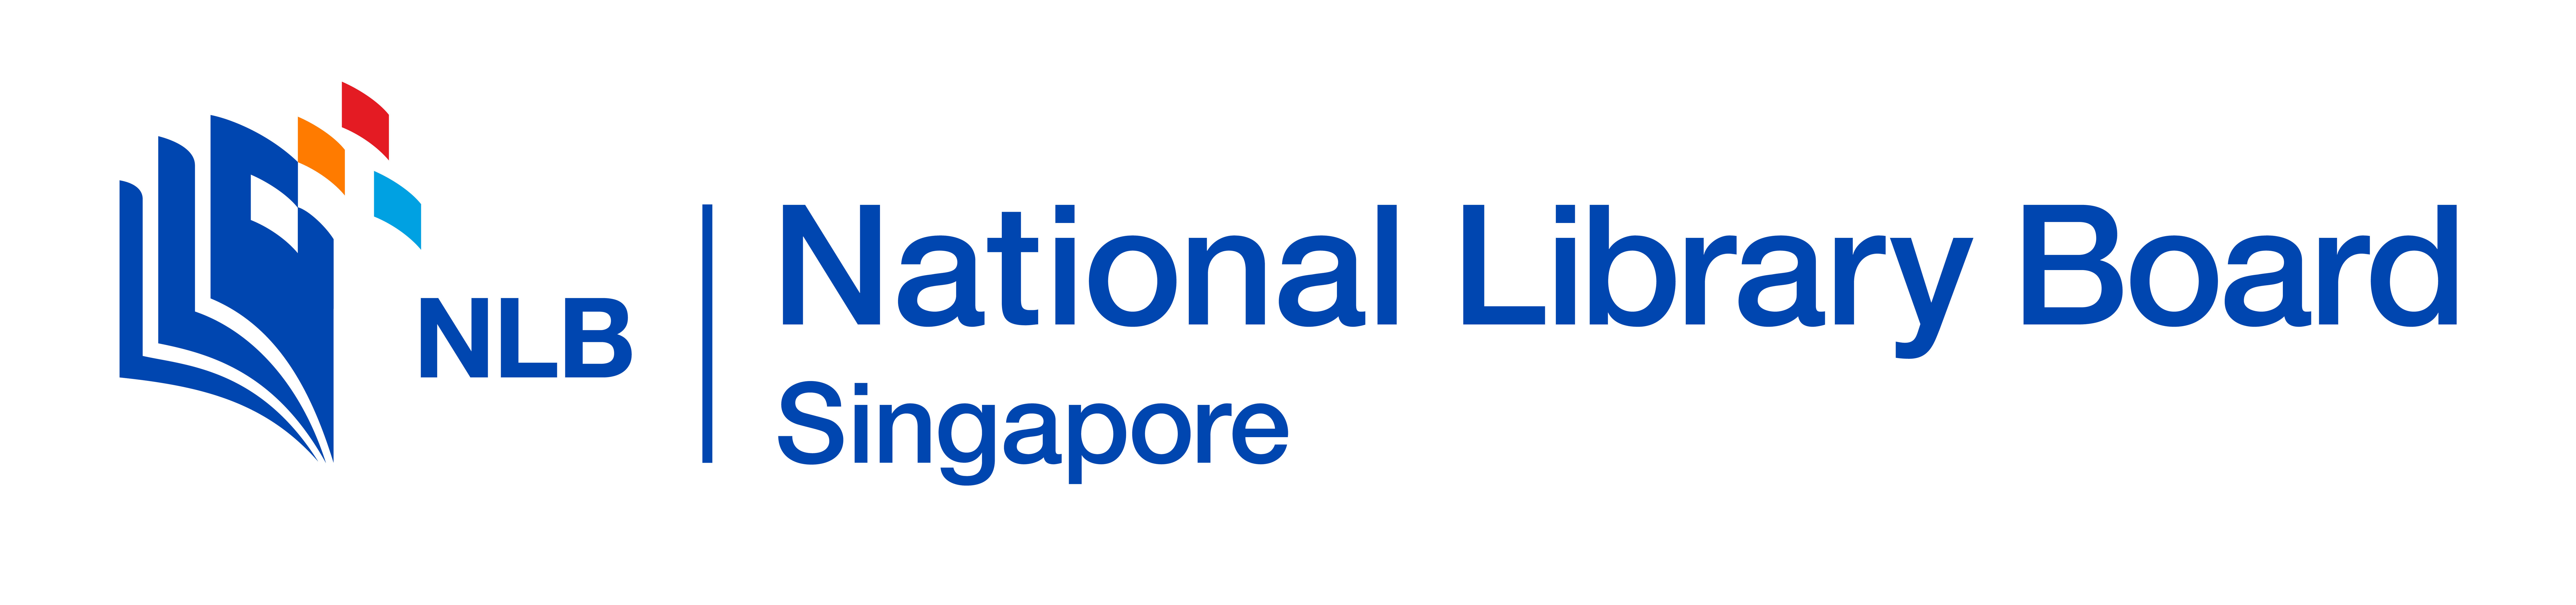 NATIONAL LIBRARY BOARD